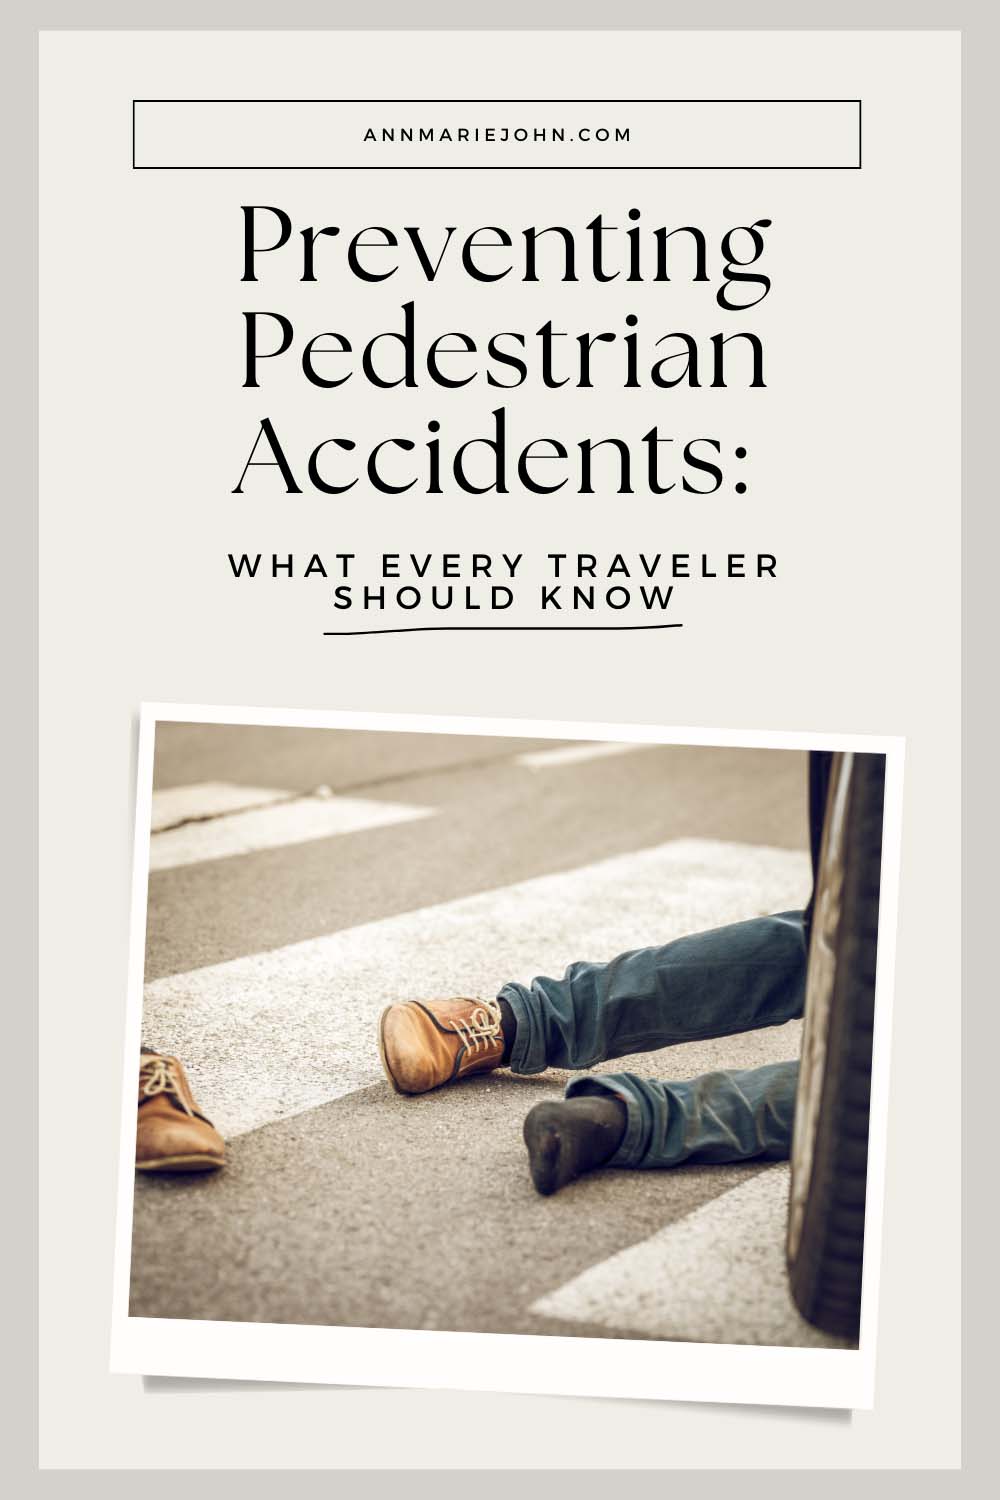 Preventing Pedestrian Accidents: What Every Traveler Should Know